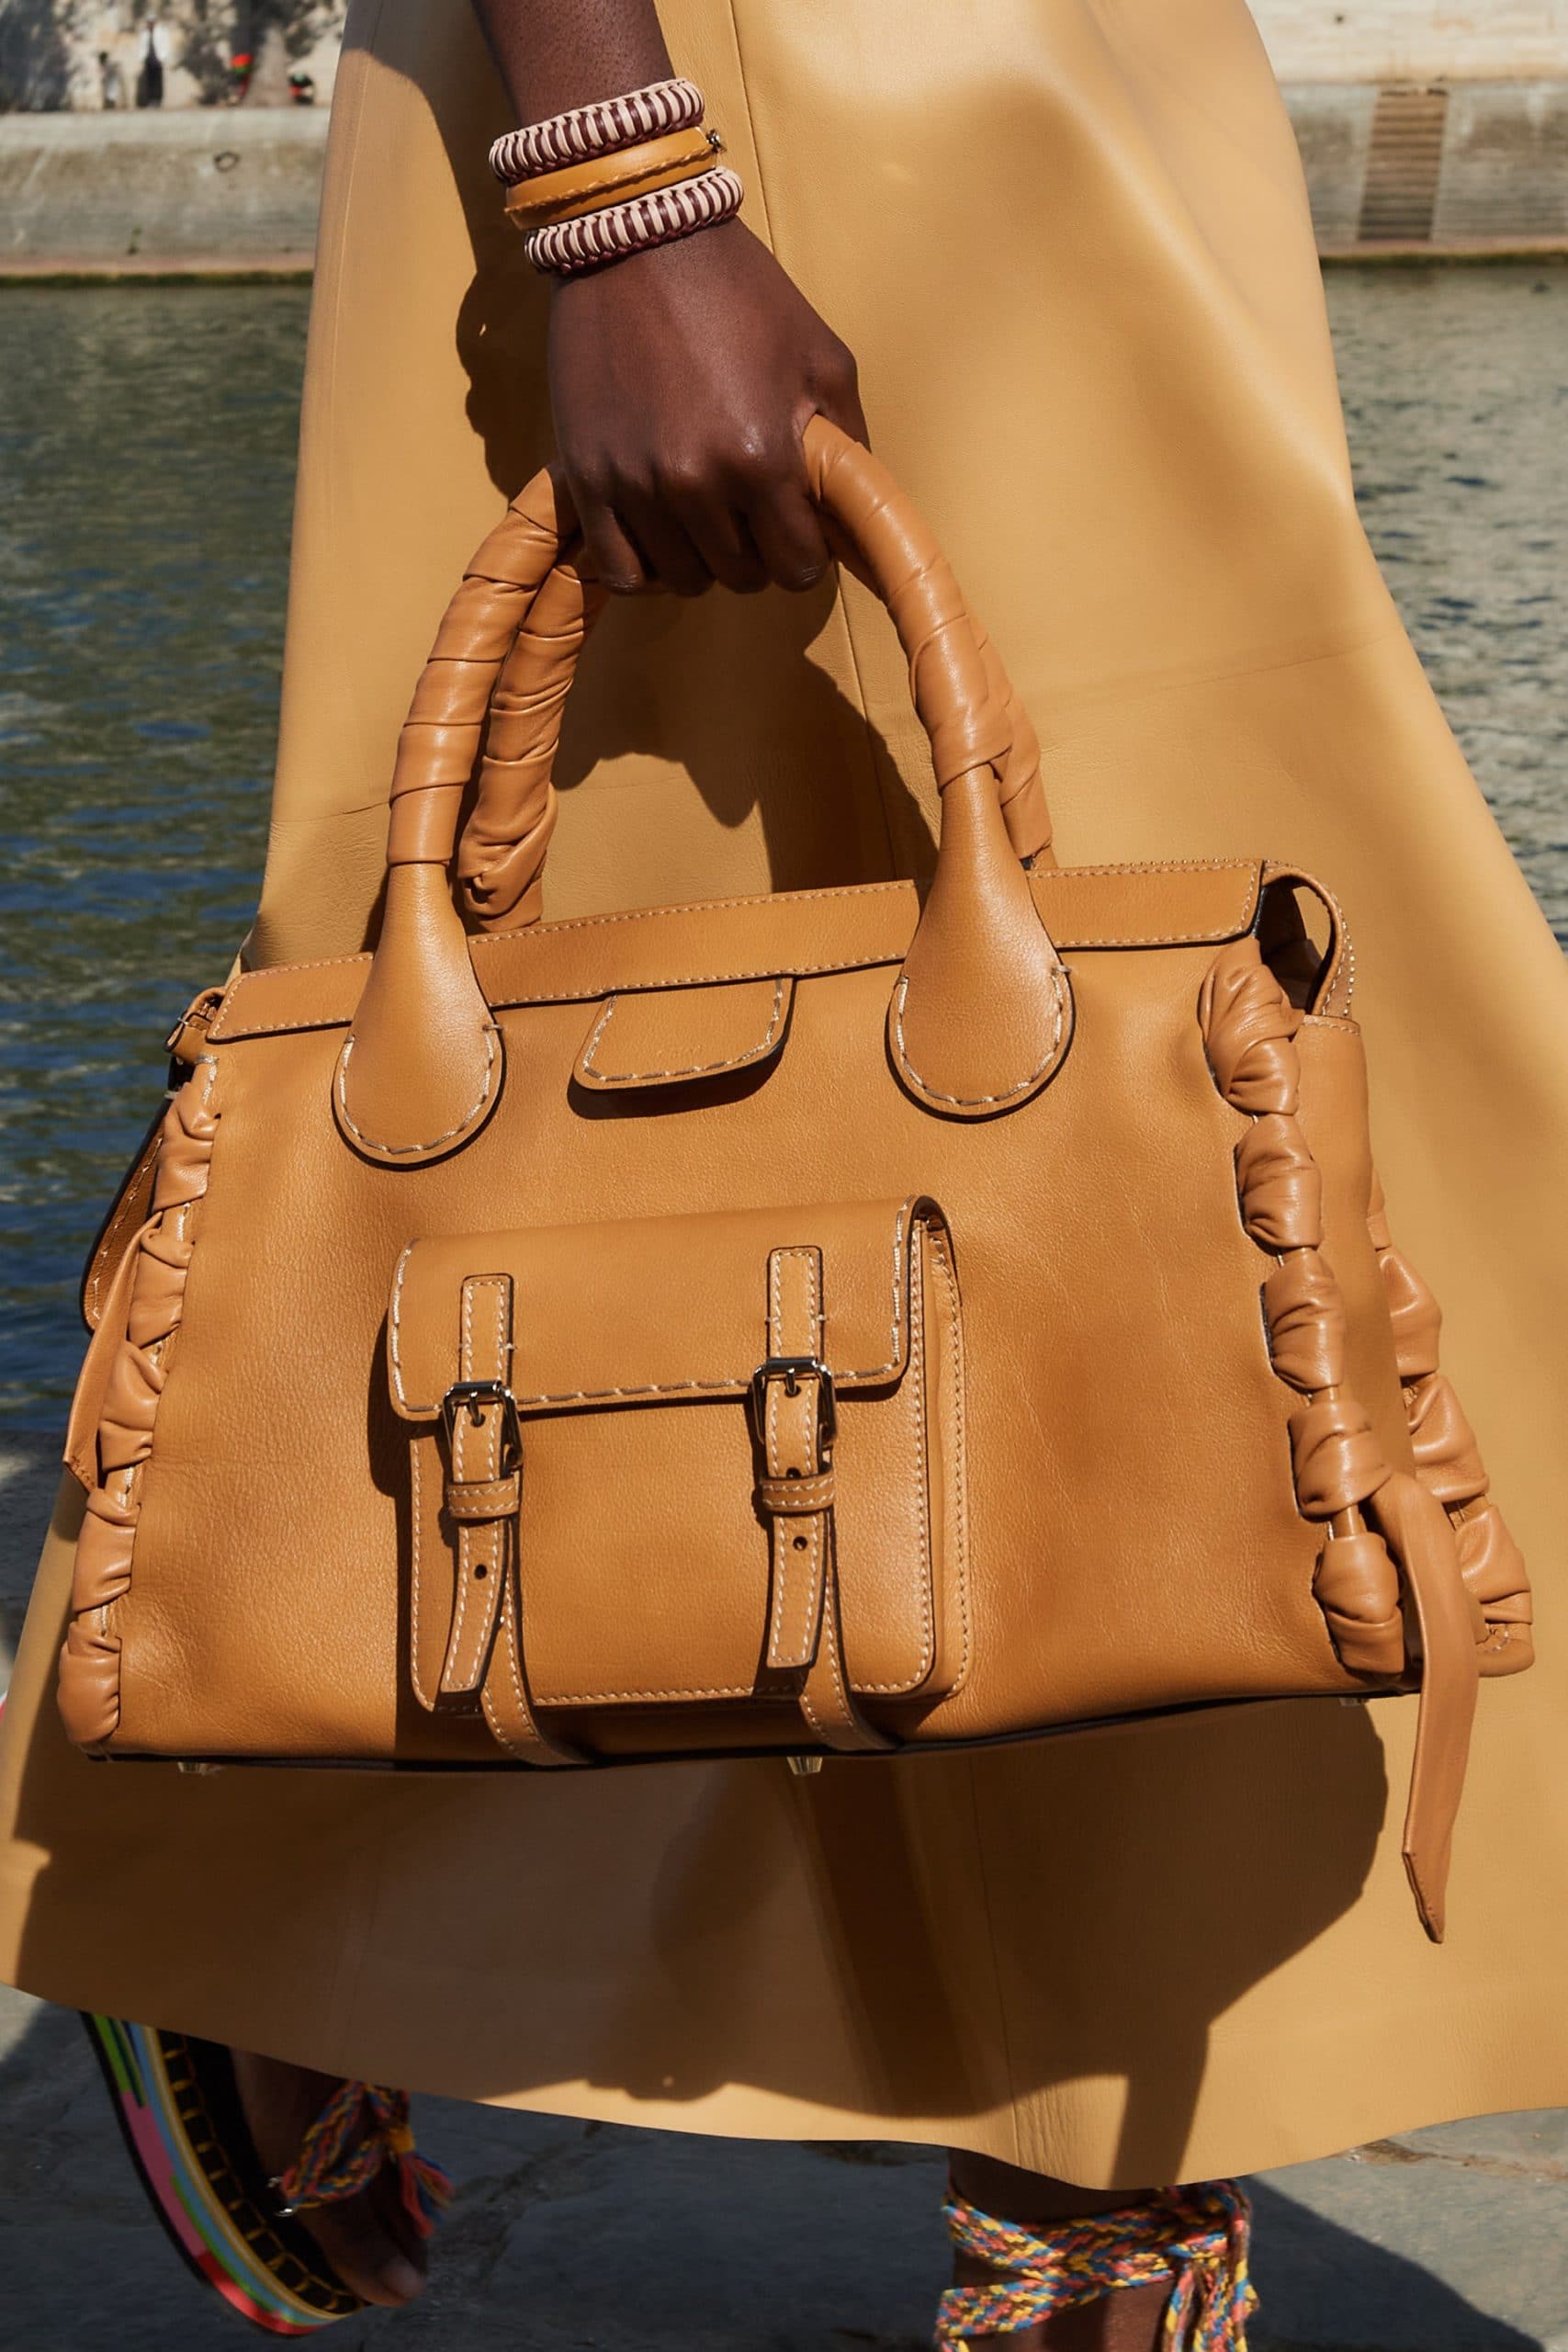 The most popular Chloé bags in 2022